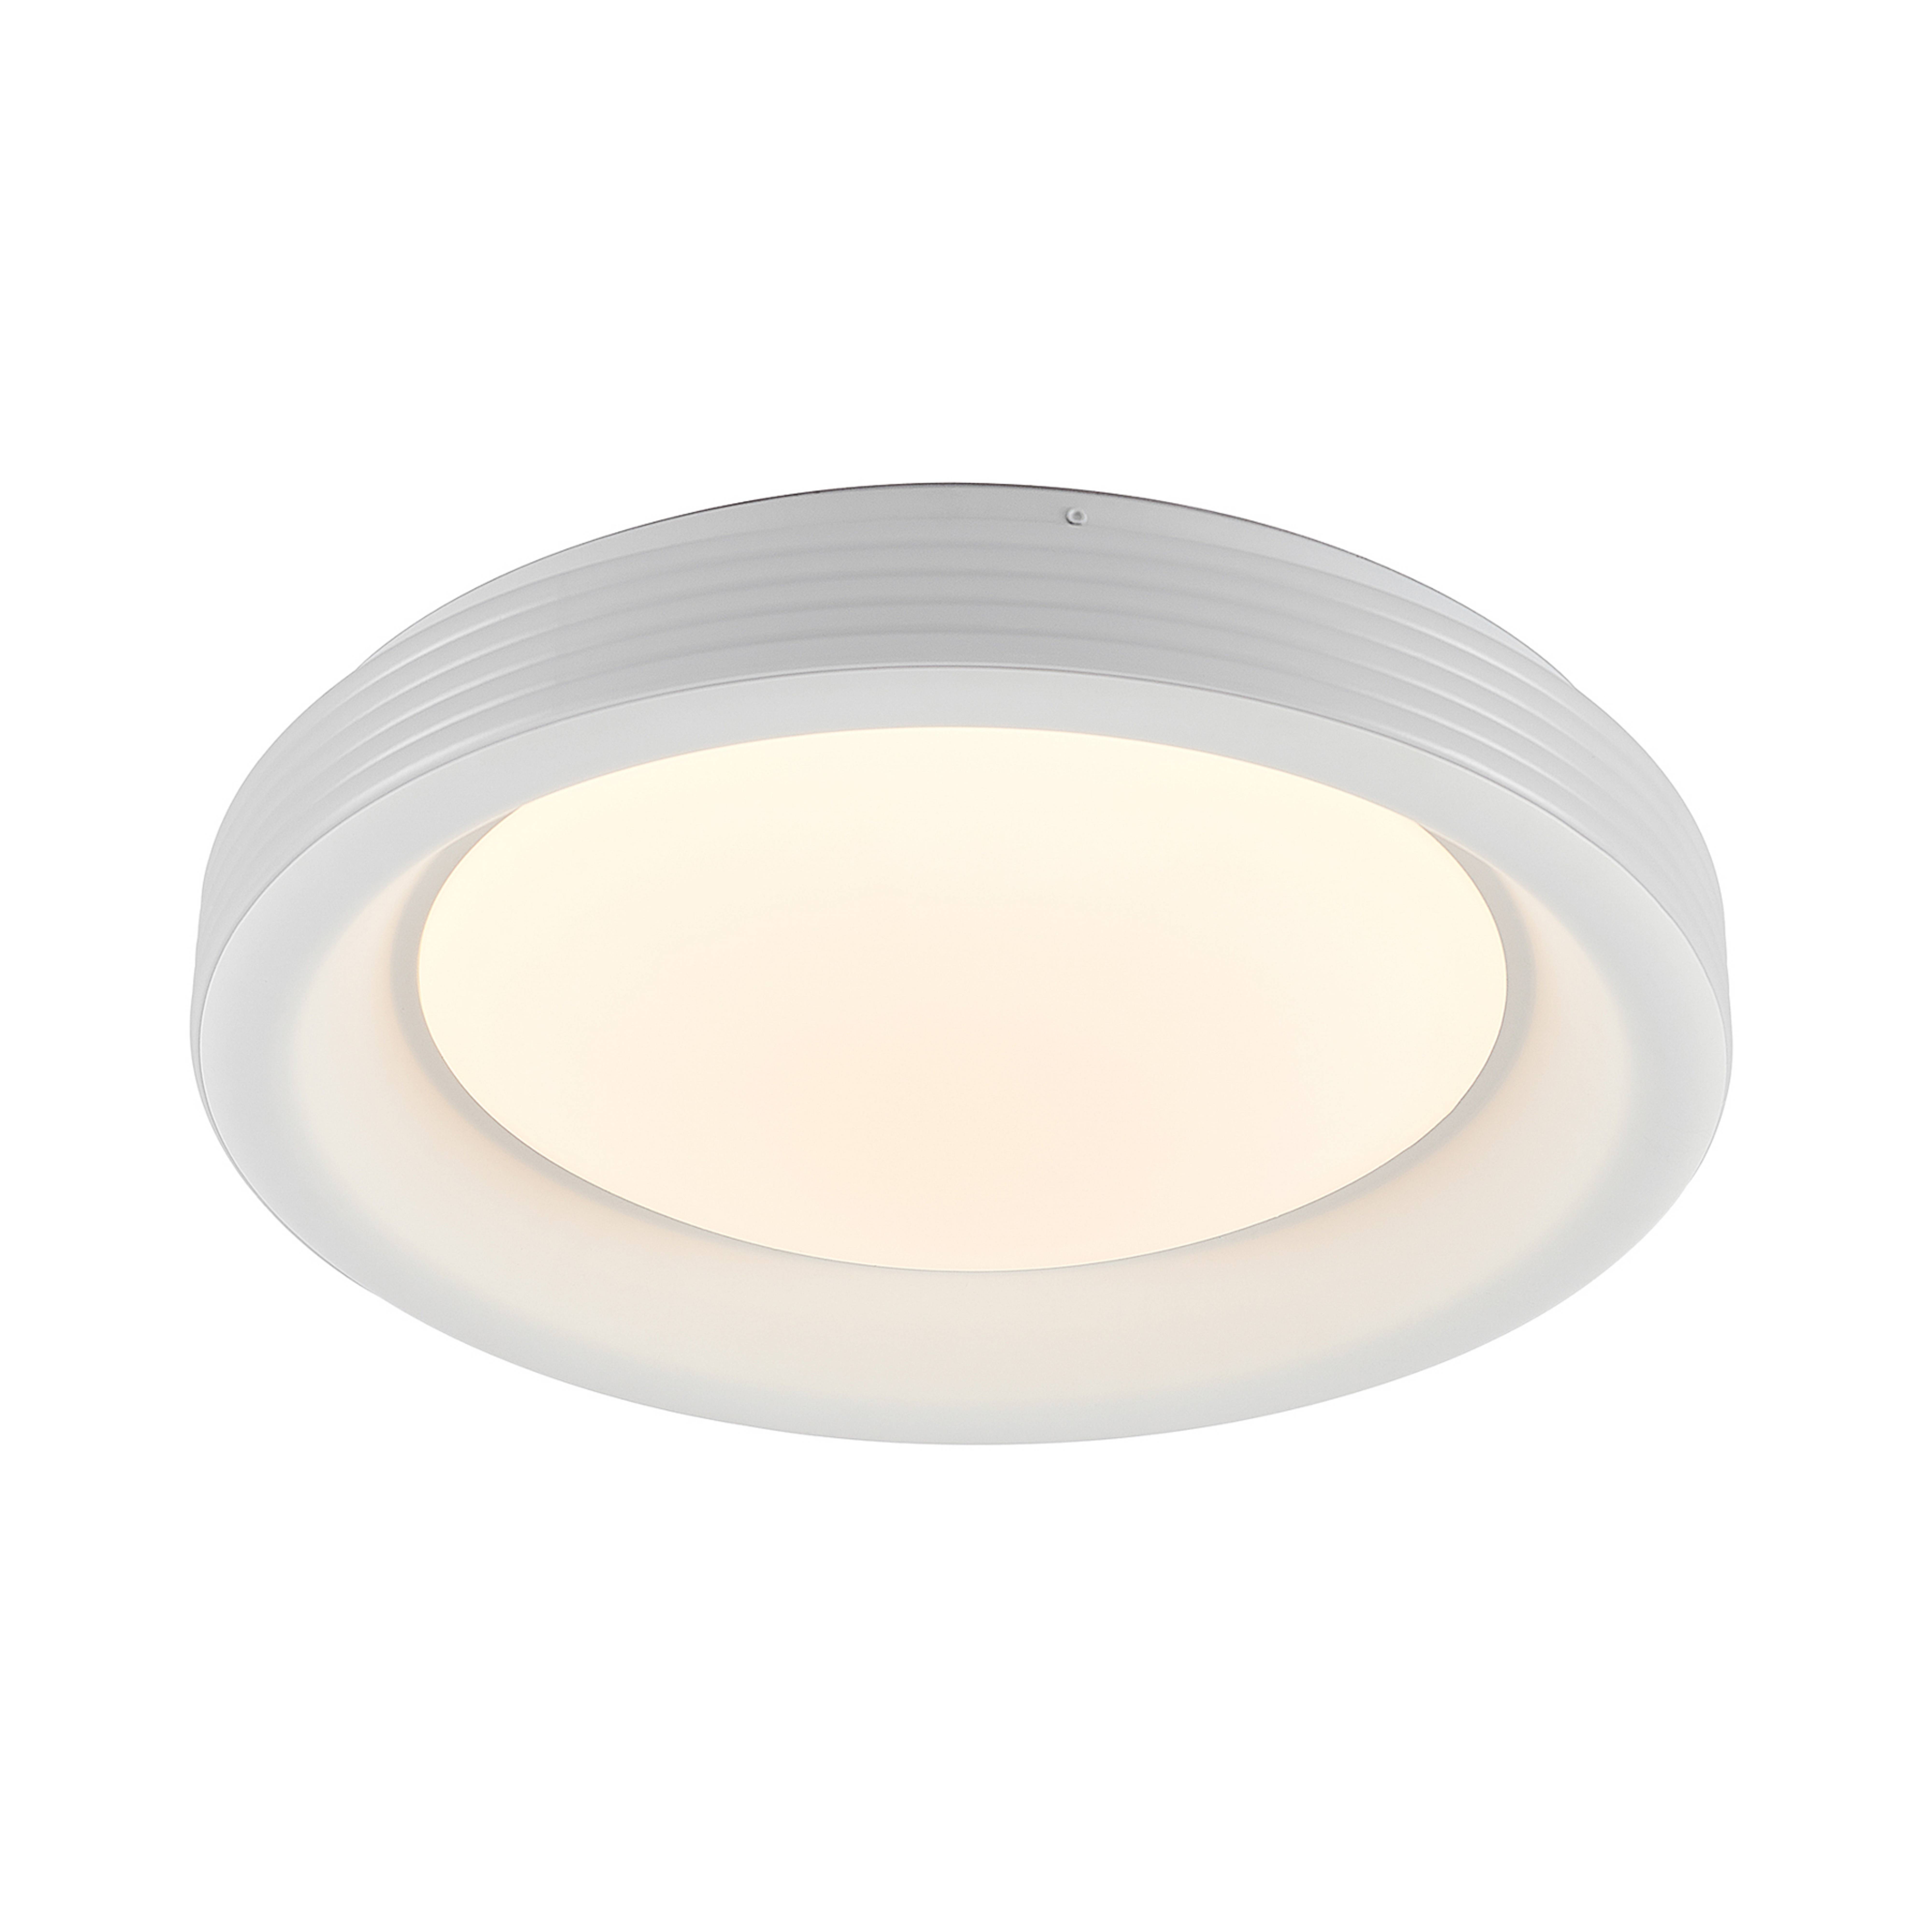 Lindby Inarum plafonnier LED, RVB, CCT, dimmable